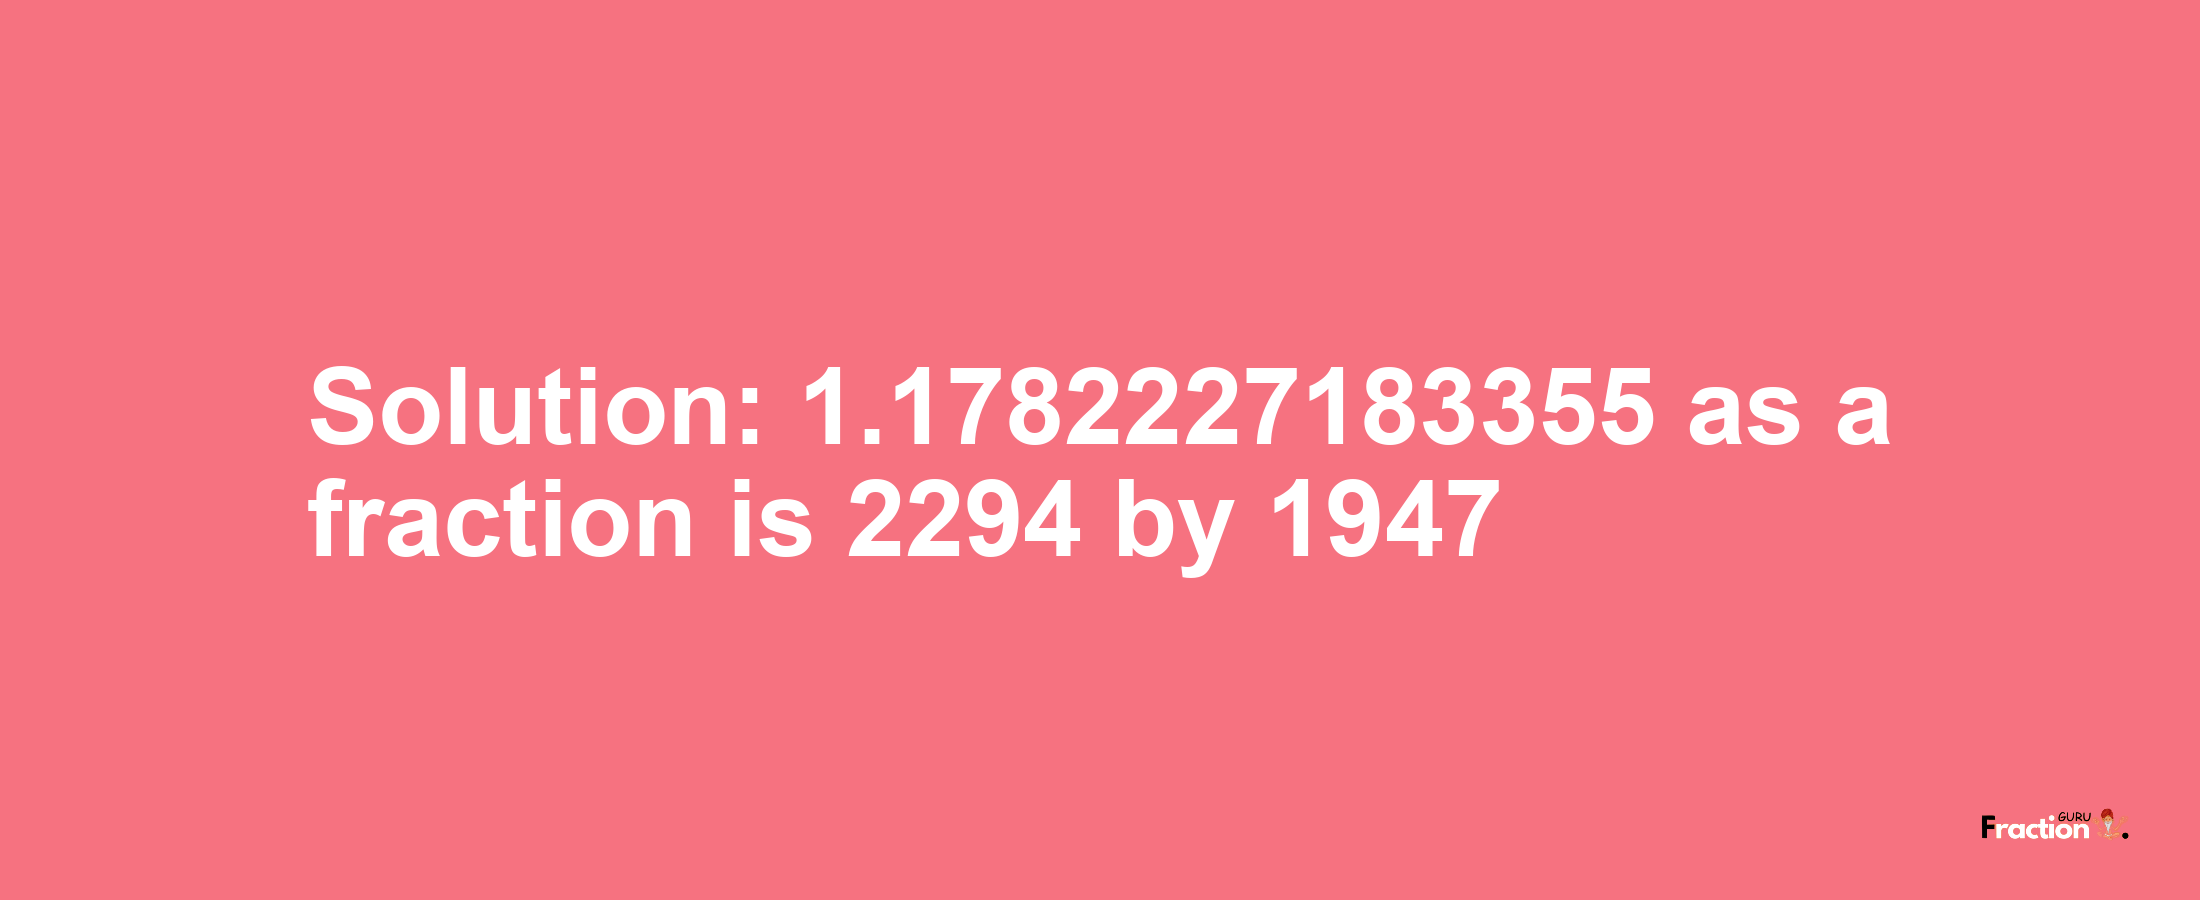 Solution:1.1782227183355 as a fraction is 2294/1947